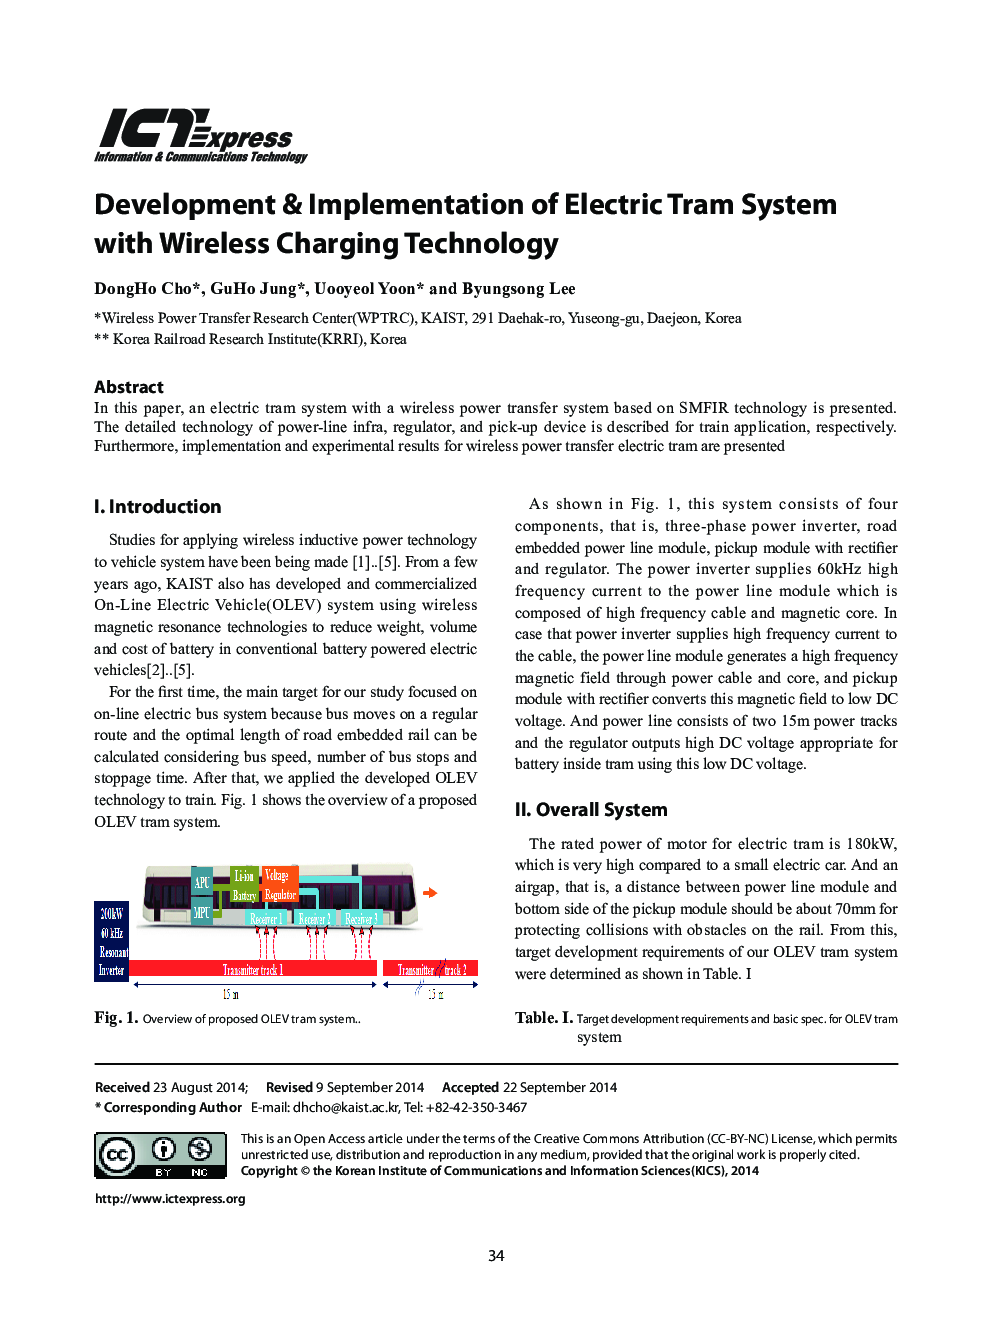 Development & Implementation of Electric Tram System with Wireless Charging Technology 